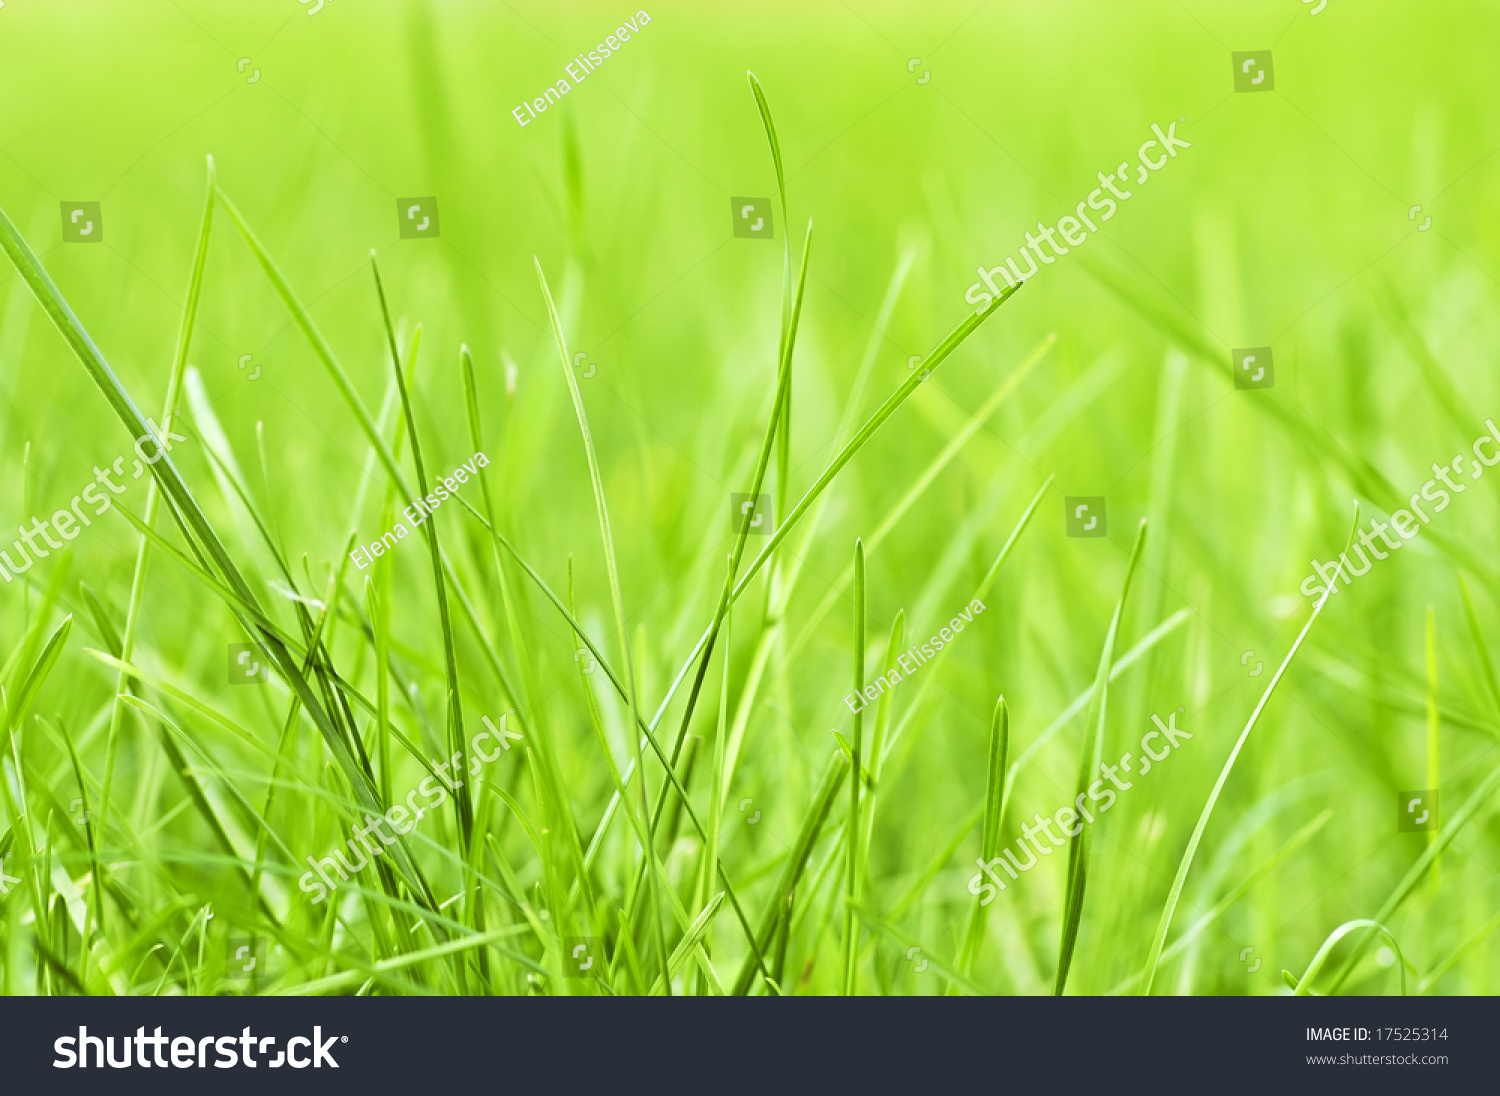 Natural Background Of Green Grass Blades Close Up Stock Photo 17525314